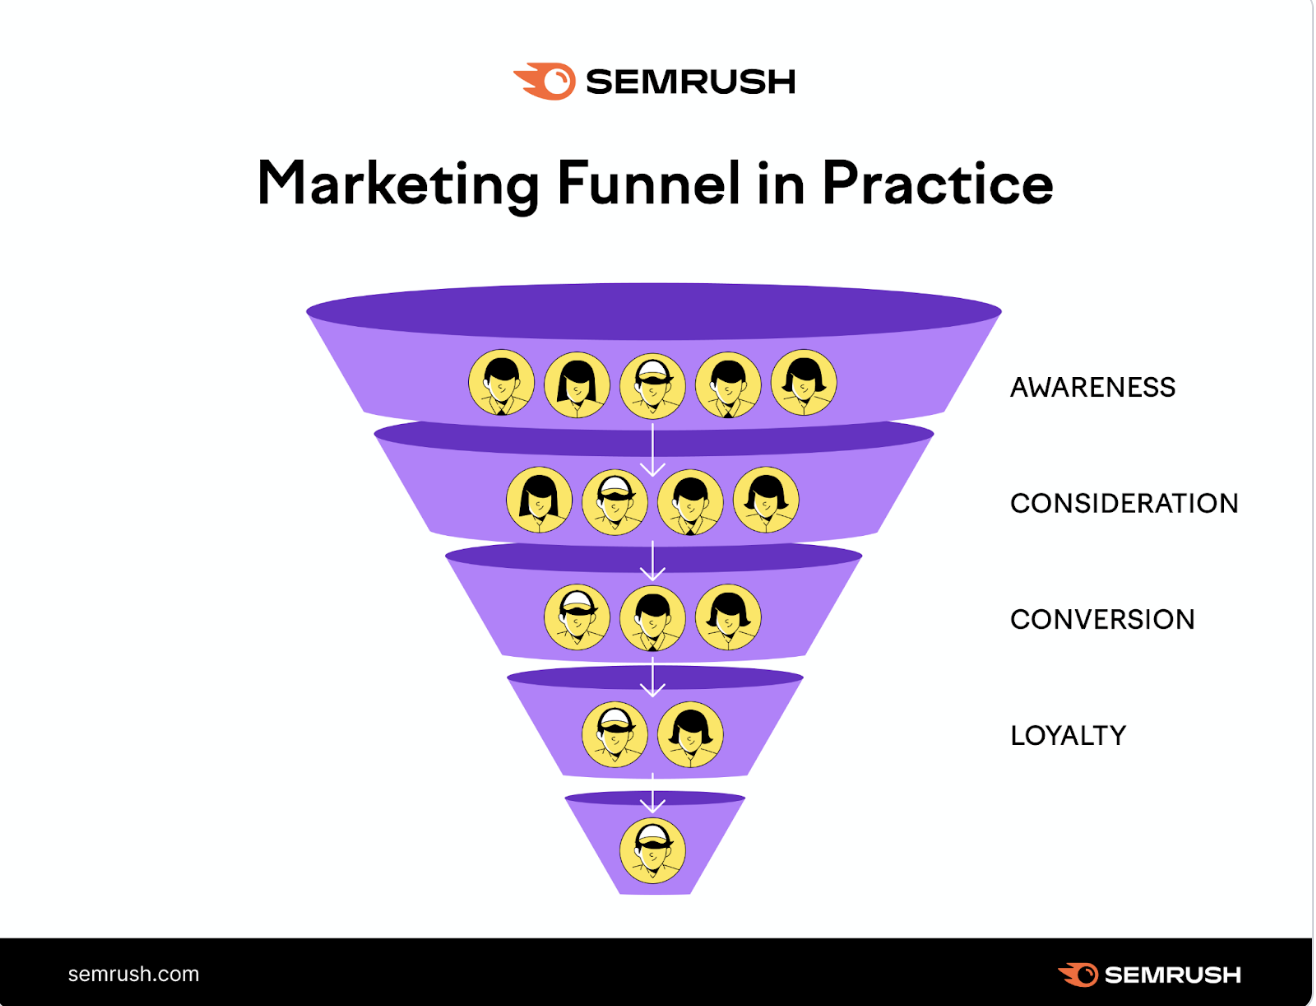 An infographic showing the marketing funnel in practice with "awareness," "consideration," "conversion," and "loyalty" stages